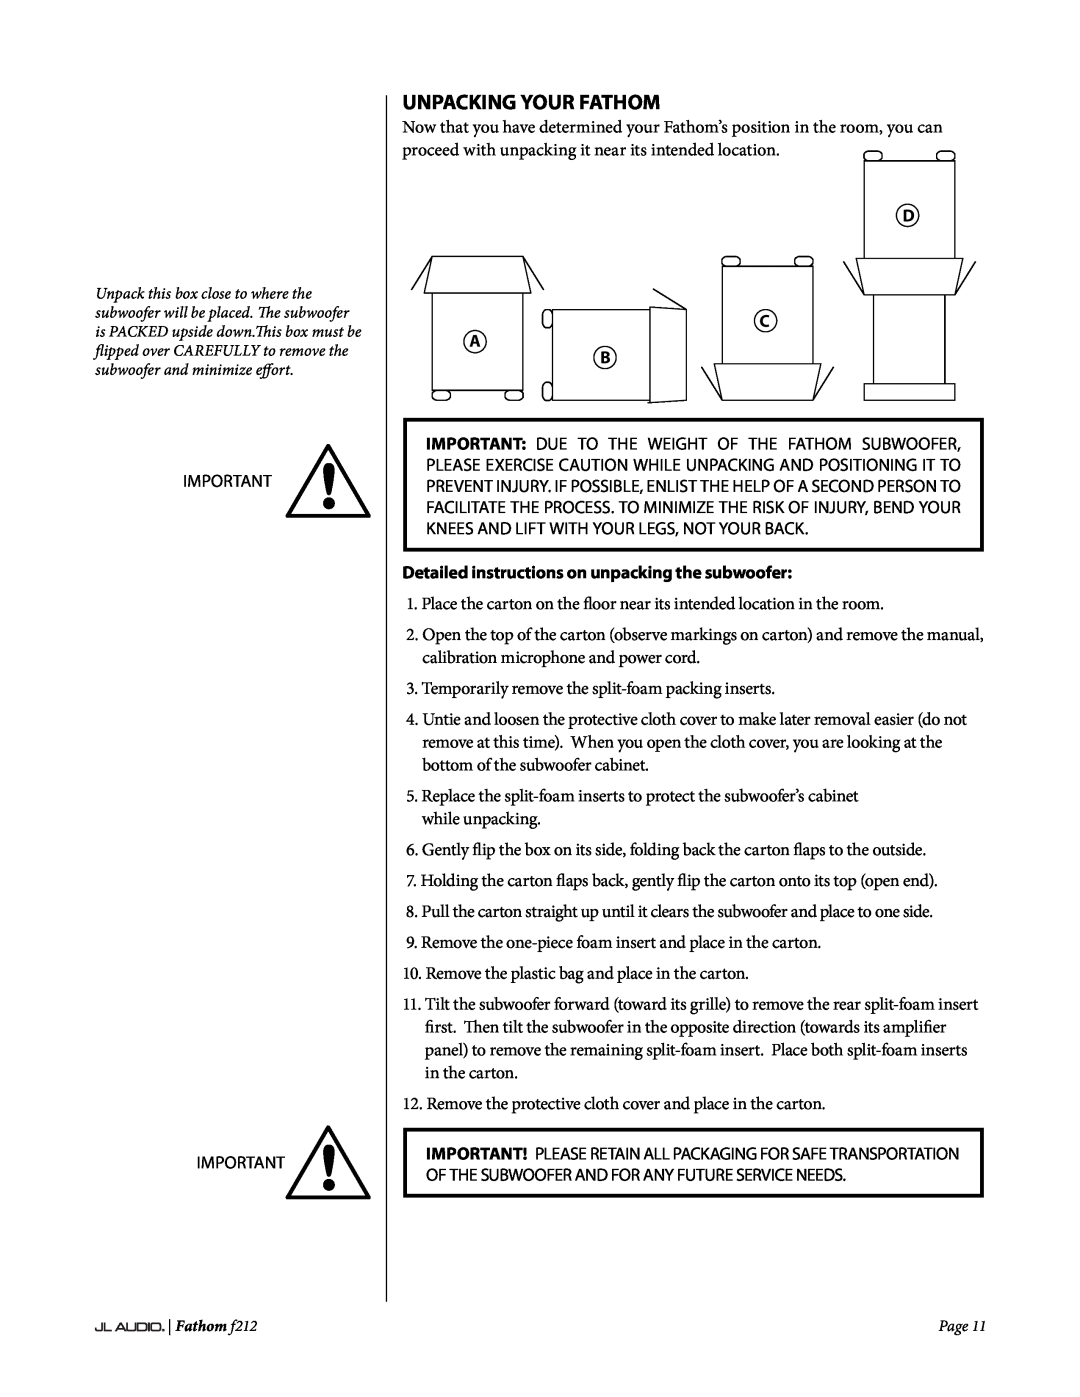 JL Audio f212 owner manual Unpacking Your Fathom, D C B, Detailed instructions on unpacking the subwoofer 